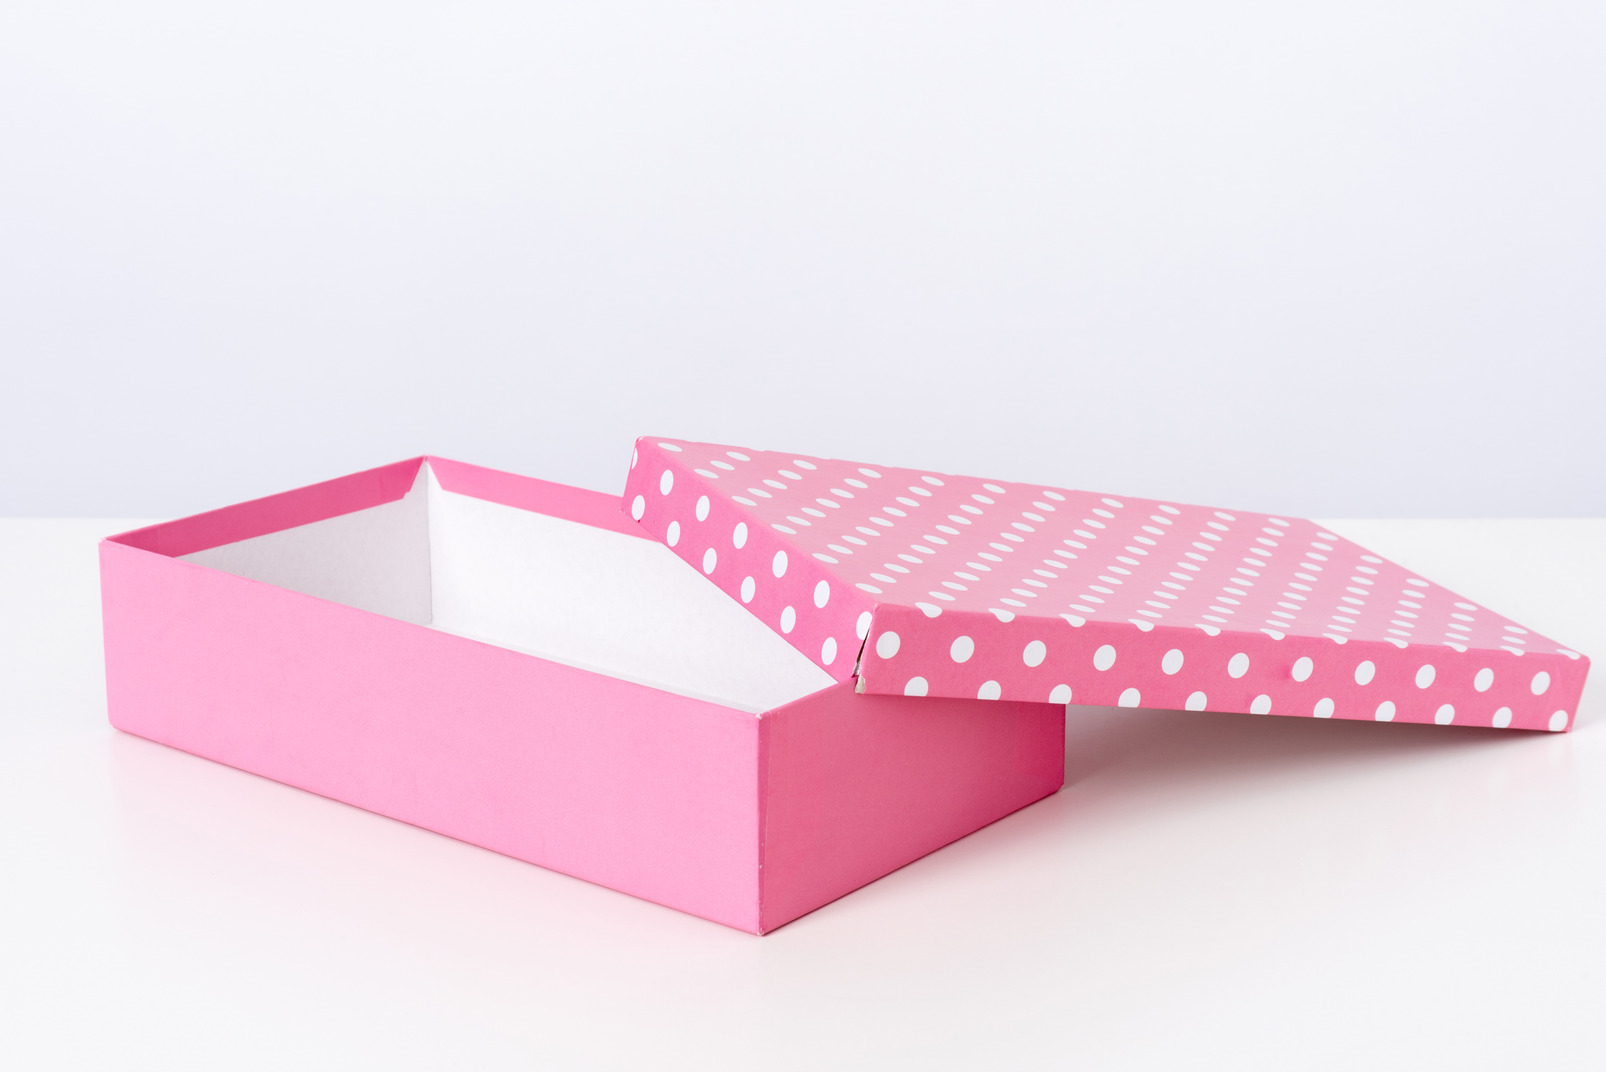 Pink gift box on a white background